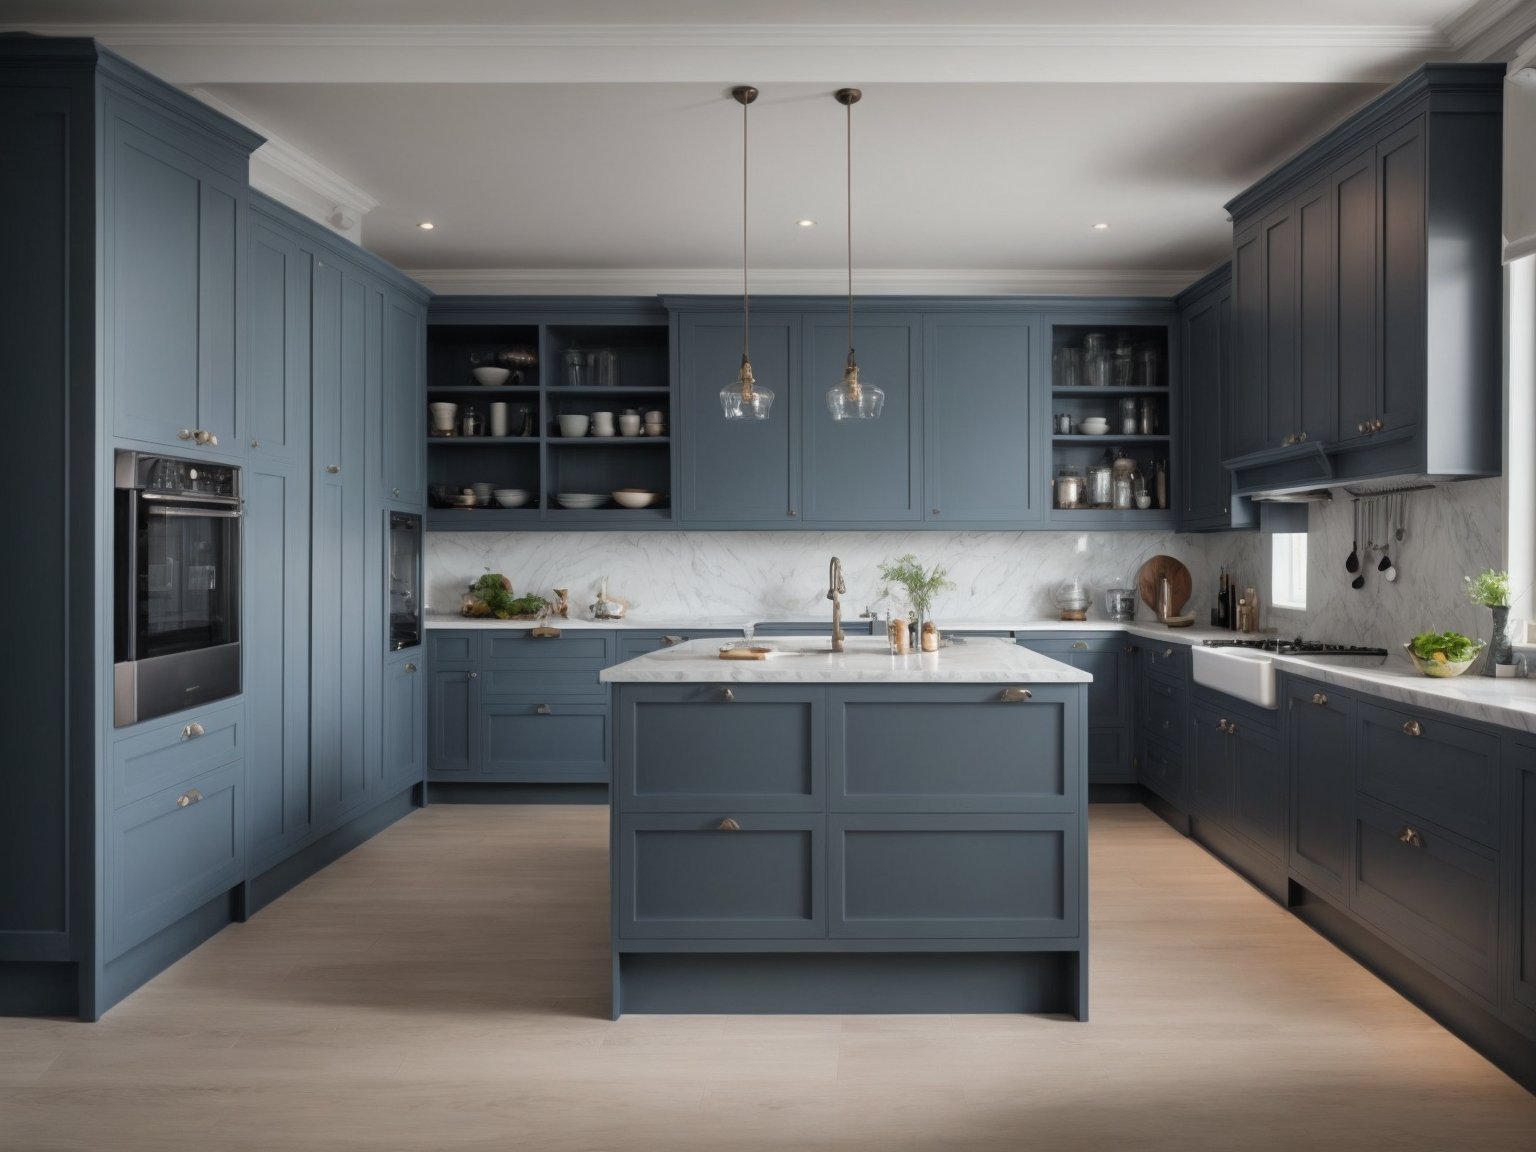 A picture of blue grey two tone kitchen cabinets, featuring a combination of light and dark shades for a stylish contrast.